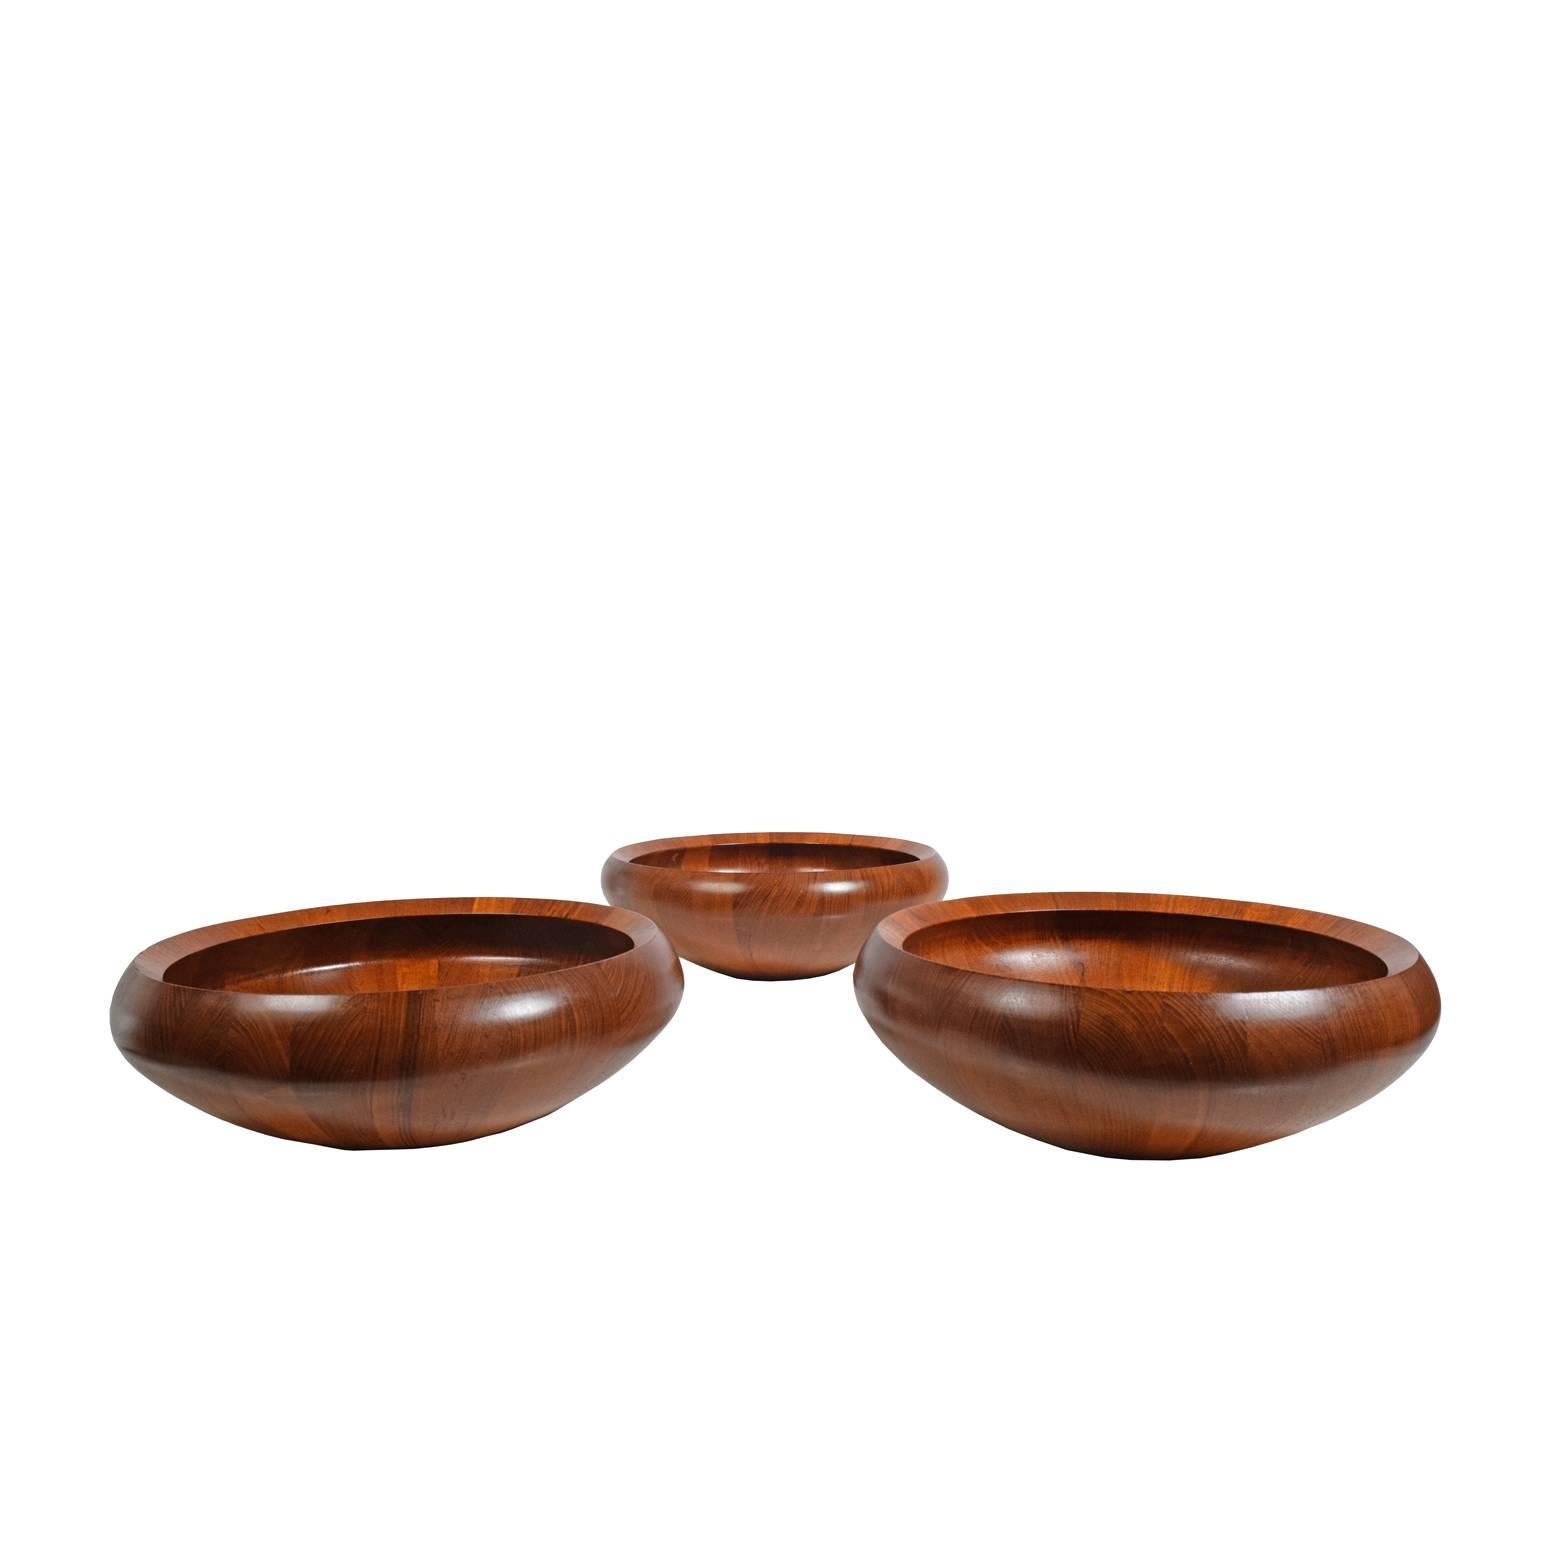 Three solid teak bowls made in butcher block technique, designed by Jens H. Quistgaard for 